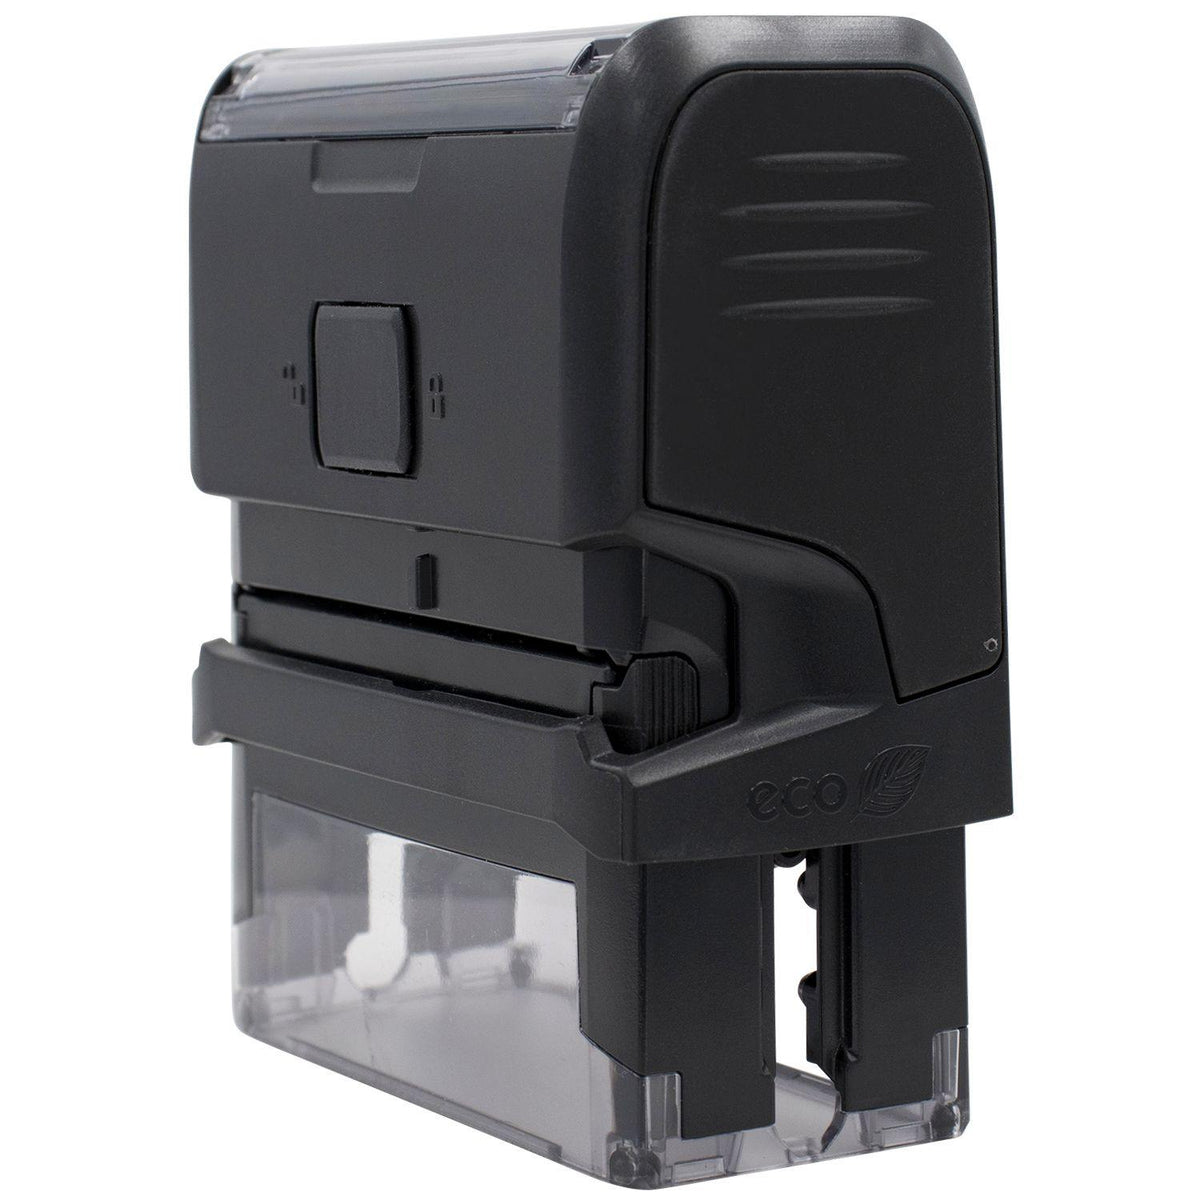 Self Inking Vehicle Loans Stamp - Engineer Seal Stamps - Brand_Trodat, Impression Size_Small, Stamp Type_Self-Inking Stamp, Type of Use_Finance